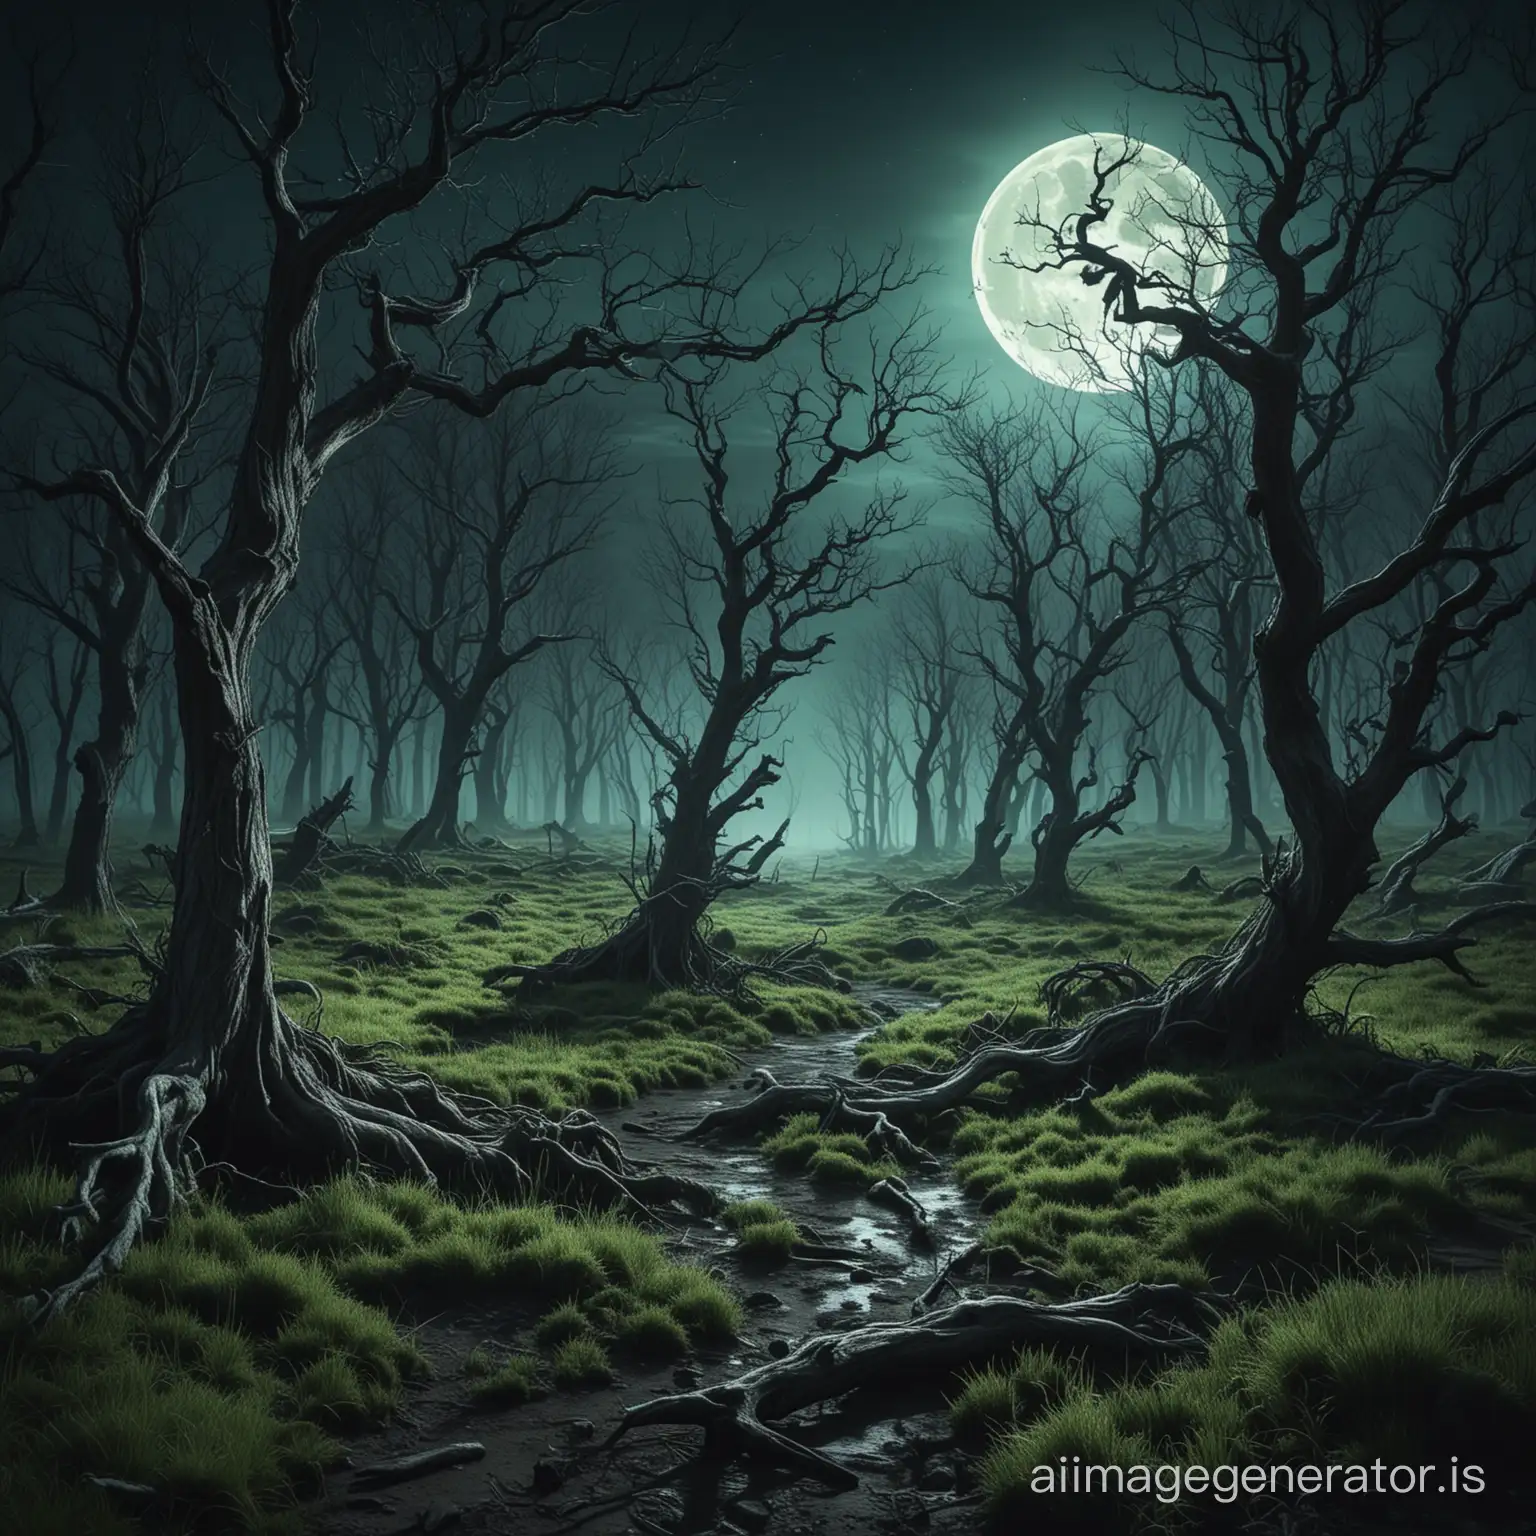 Moonlit, scary, night forest, dried out trees with gnarled branches, thick green grass on which the moonlight falls, bright juicy stylized style